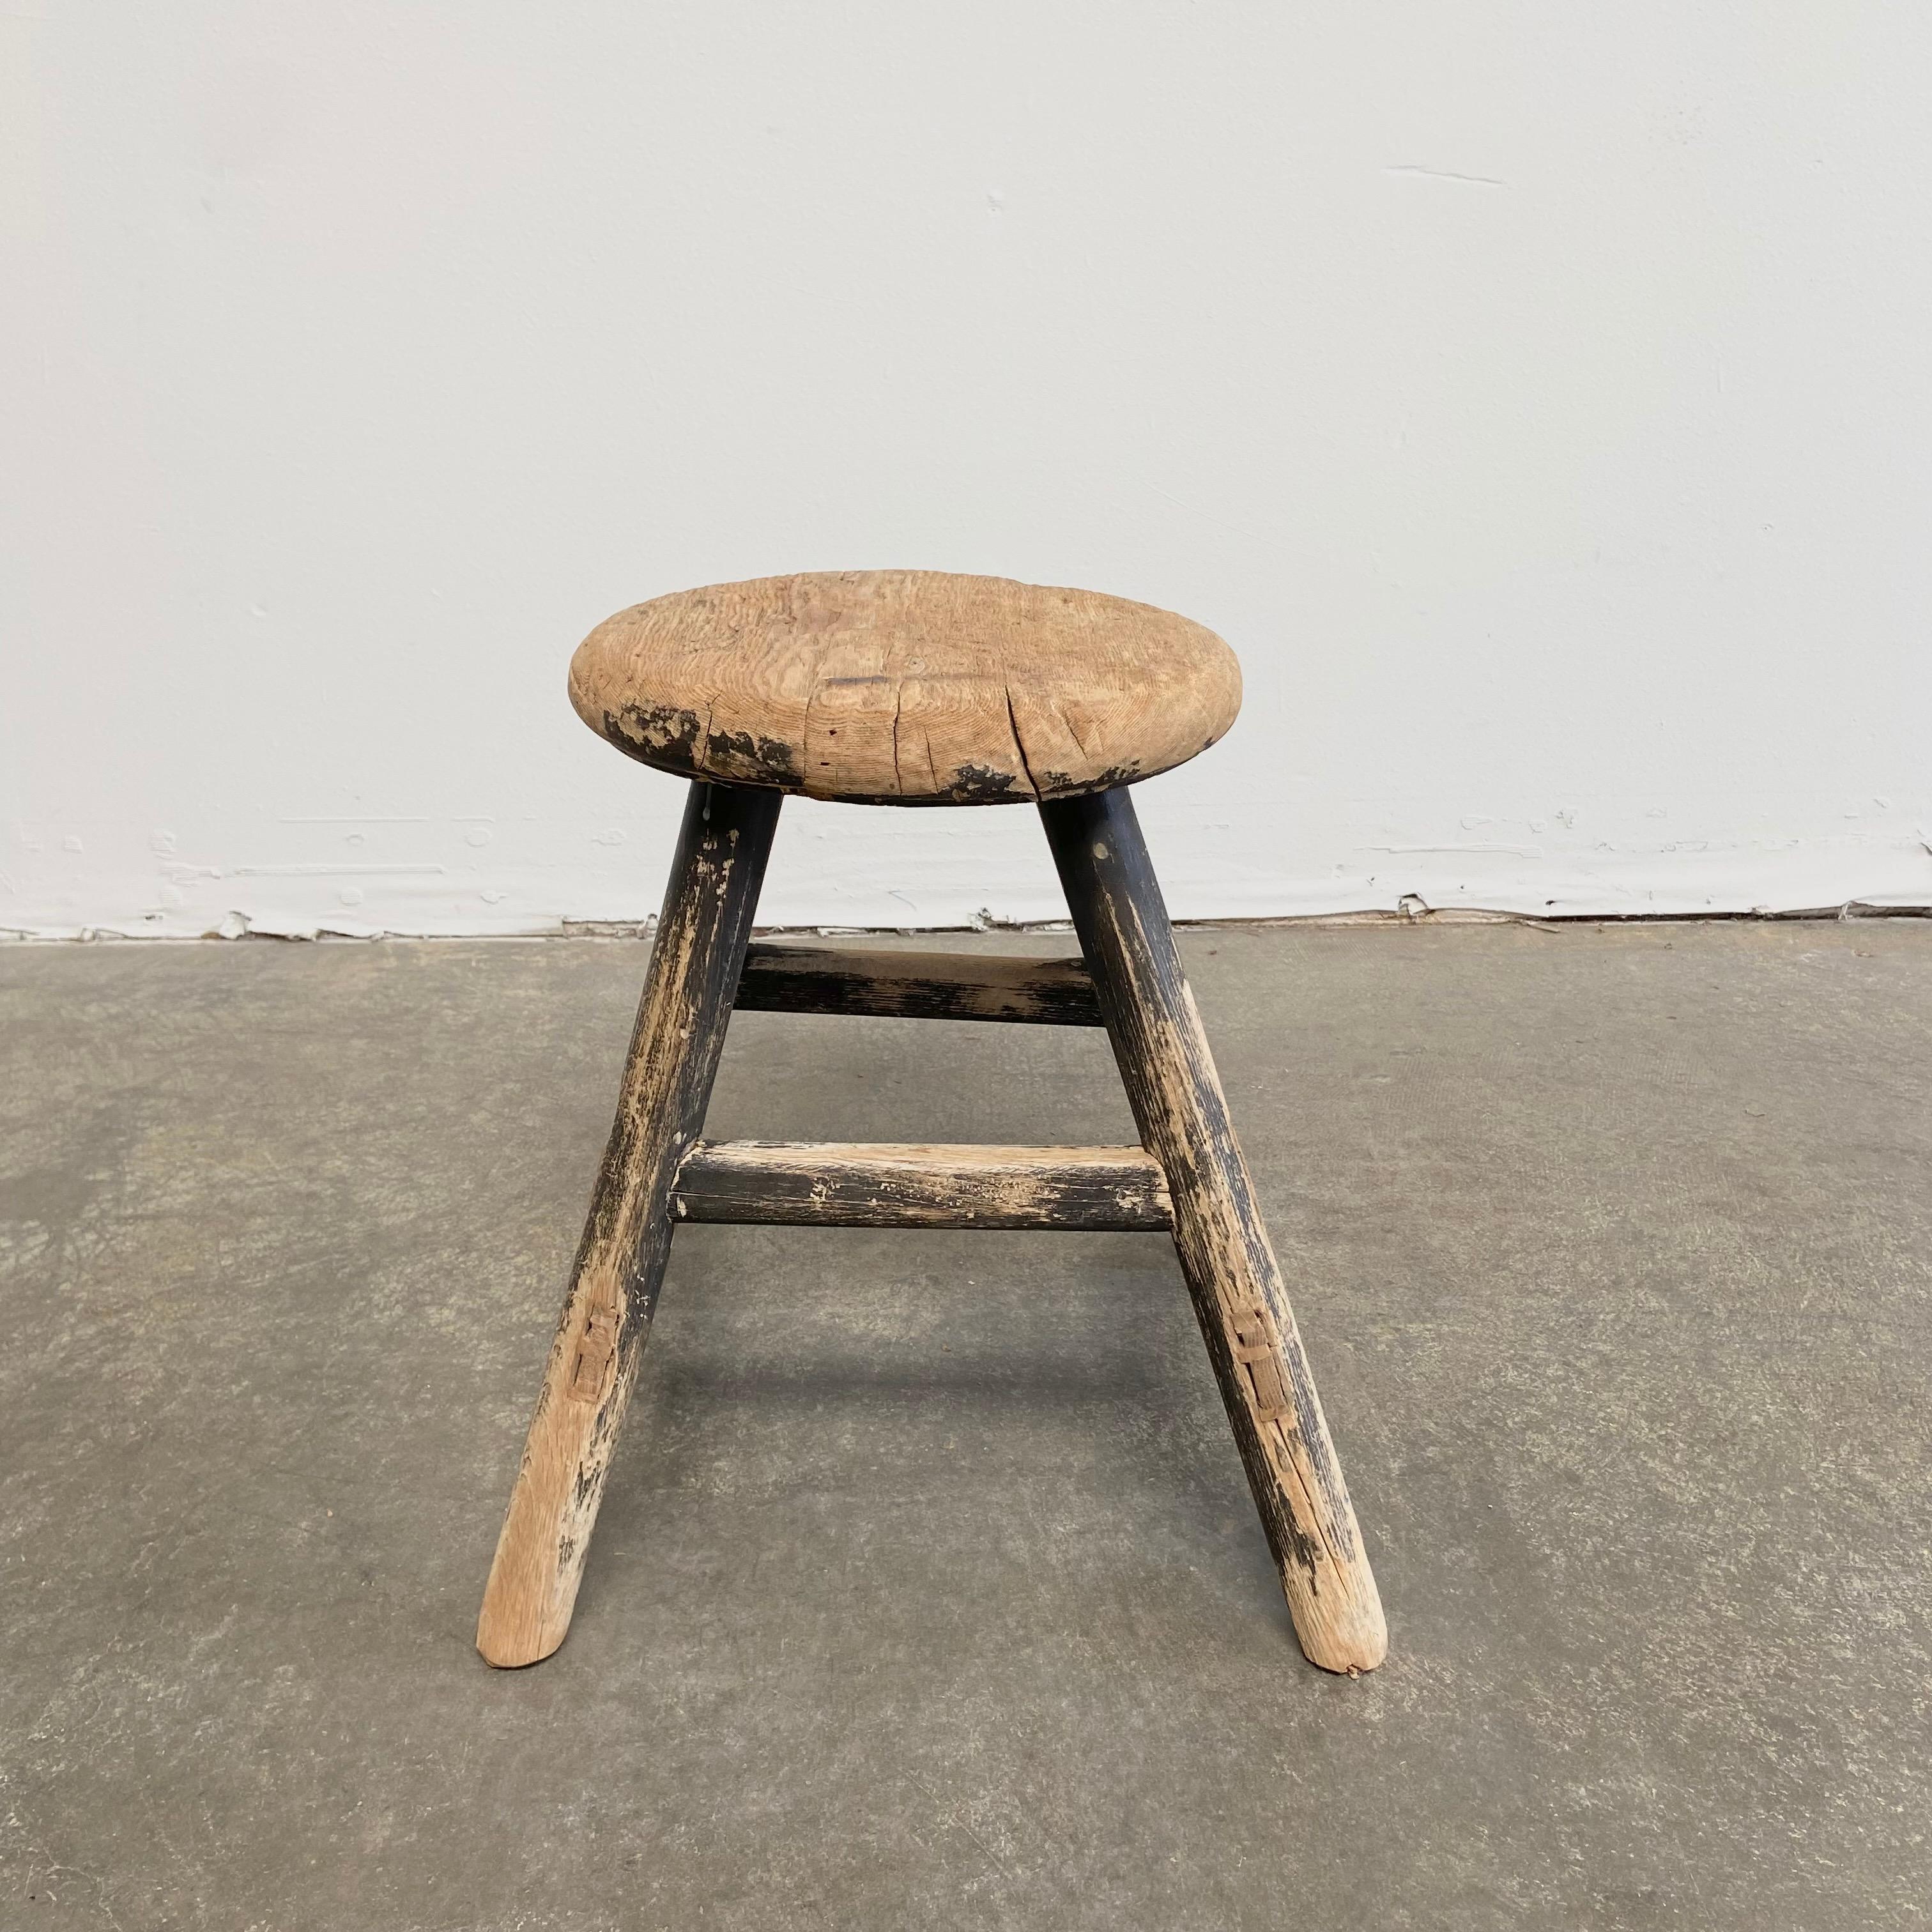 Vintage elm wood round stool
These are the real vintage antique elm wood stools! Beautiful antique patina, with weathering and age, these are solid and sturdy ready for daily use, use as a table, stool, drink table, they are great for any space.